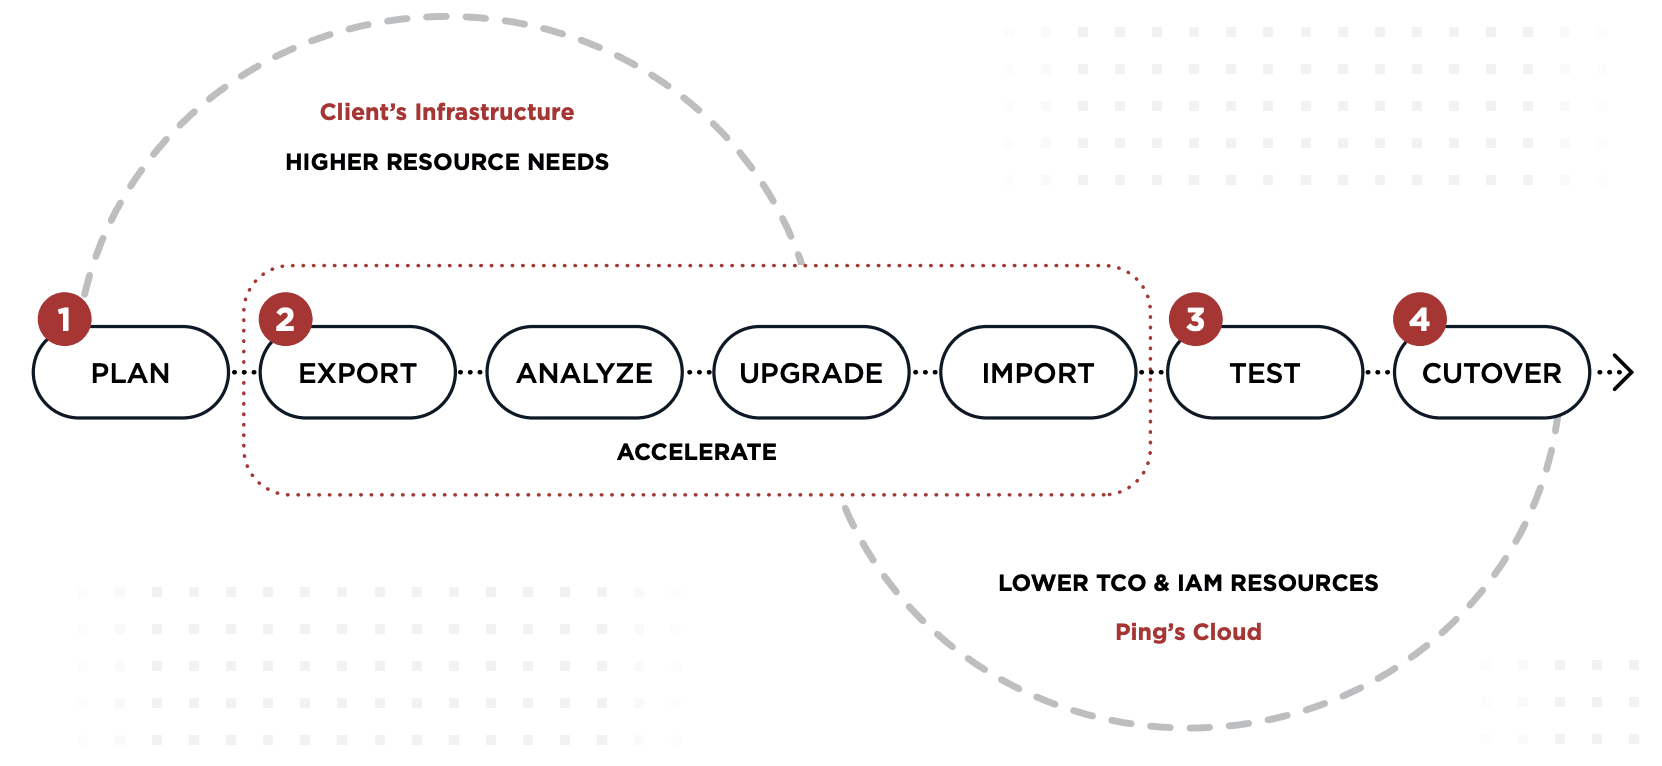 A series of 4 steps: plan, accelerate, test, and cutover that demonstrate the process of going from higher resource needs on the client's infrastructure to lower total cost of ownership and IAM resources on Ping's cloud